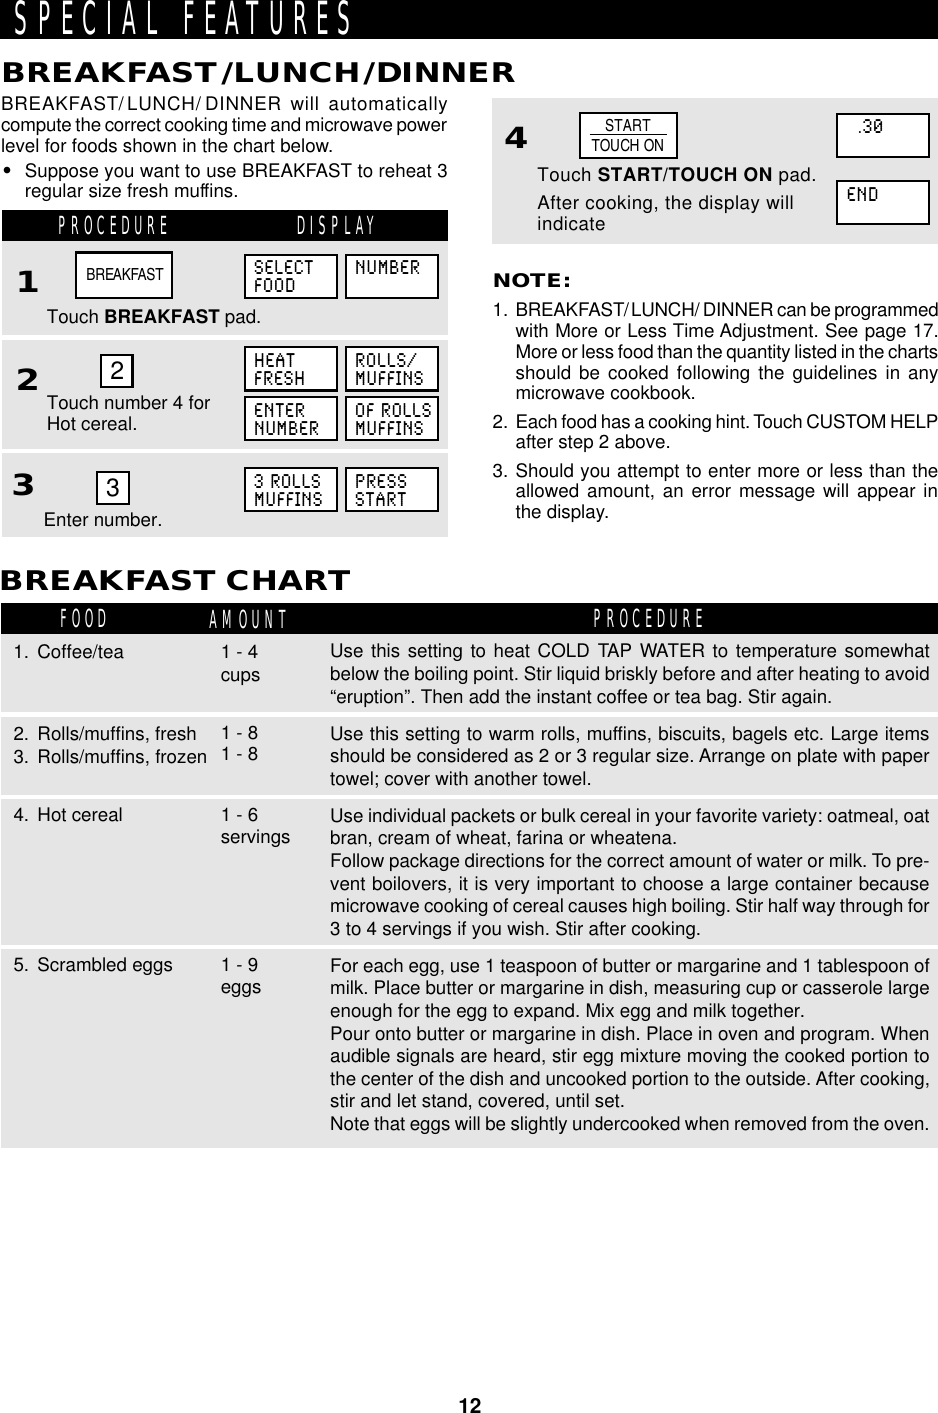 12BREAKFAST/LUNCH/ DINNER will automaticallycompute the correct cooking time and microwave powerlevel for foods shown in the chart below.•Suppose you want to use BREAKFAST to reheat 3regular size fresh muffins.BREAKFAST/LUNCH/DINNERPROCEDURE DISPLAY1Touch BREAKFAST pad.Touch number 4 forHot cereal.2NOTE:1. BREAKFAST/LUNCH/ DINNER can be programmedwith More or Less Time Adjustment. See page 17.More or less food than the quantity listed in the chartsshould be cooked following the guidelines in anymicrowave cookbook.2. Each food has a cooking hint. Touch CUSTOM HELPafter step 2 above.3. Should you attempt to enter more or less than theallowed amount, an error message will appear inthe display.23Enter number.4Touch START/TOUCH ON pad.After cooking, the display willindicate3SPECIAL FEATURESBREAKFASTSELECTFOODNUMBERHEATFRESHROLLS/MUFFINS3 ROLLSMUFFINSPRESSSTARTSTARTTOUCH ONENDBREAKFAST CHARTFOOD AMOUNT PROCEDURE2. Rolls/muffins, fresh3. Rolls/muffins, frozen4. Hot cereal5. Scrambled eggsUse this setting to heat COLD TAP WATER to temperature somewhatbelow the boiling point. Stir liquid briskly before and after heating to avoid“eruption”. Then add the instant coffee or tea bag. Stir again.Use this setting to warm rolls, muffins, biscuits, bagels etc. Large itemsshould be considered as 2 or 3 regular size. Arrange on plate with papertowel; cover with another towel.Use individual packets or bulk cereal in your favorite variety: oatmeal, oatbran, cream of wheat, farina or wheatena.Follow package directions for the correct amount of water or milk. To pre-vent boilovers, it is very important to choose a large container becausemicrowave cooking of cereal causes high boiling. Stir half way through for3 to 4 servings if you wish. Stir after cooking.For each egg, use 1 teaspoon of butter or margarine and 1 tablespoon ofmilk. Place butter or margarine in dish, measuring cup or casserole largeenough for the egg to expand. Mix egg and milk together.Pour onto butter or margarine in dish. Place in oven and program. Whenaudible signals are heard, stir egg mixture moving the cooked portion tothe center of the dish and uncooked portion to the outside. After cooking,stir and let stand, covered, until set.Note that eggs will be slightly undercooked when removed from the oven.1 - 4cups1. Coffee/tea1 - 81 - 81 - 6servings1 - 9eggsENTERNUMBEROF ROLLSMUFFINS  .30